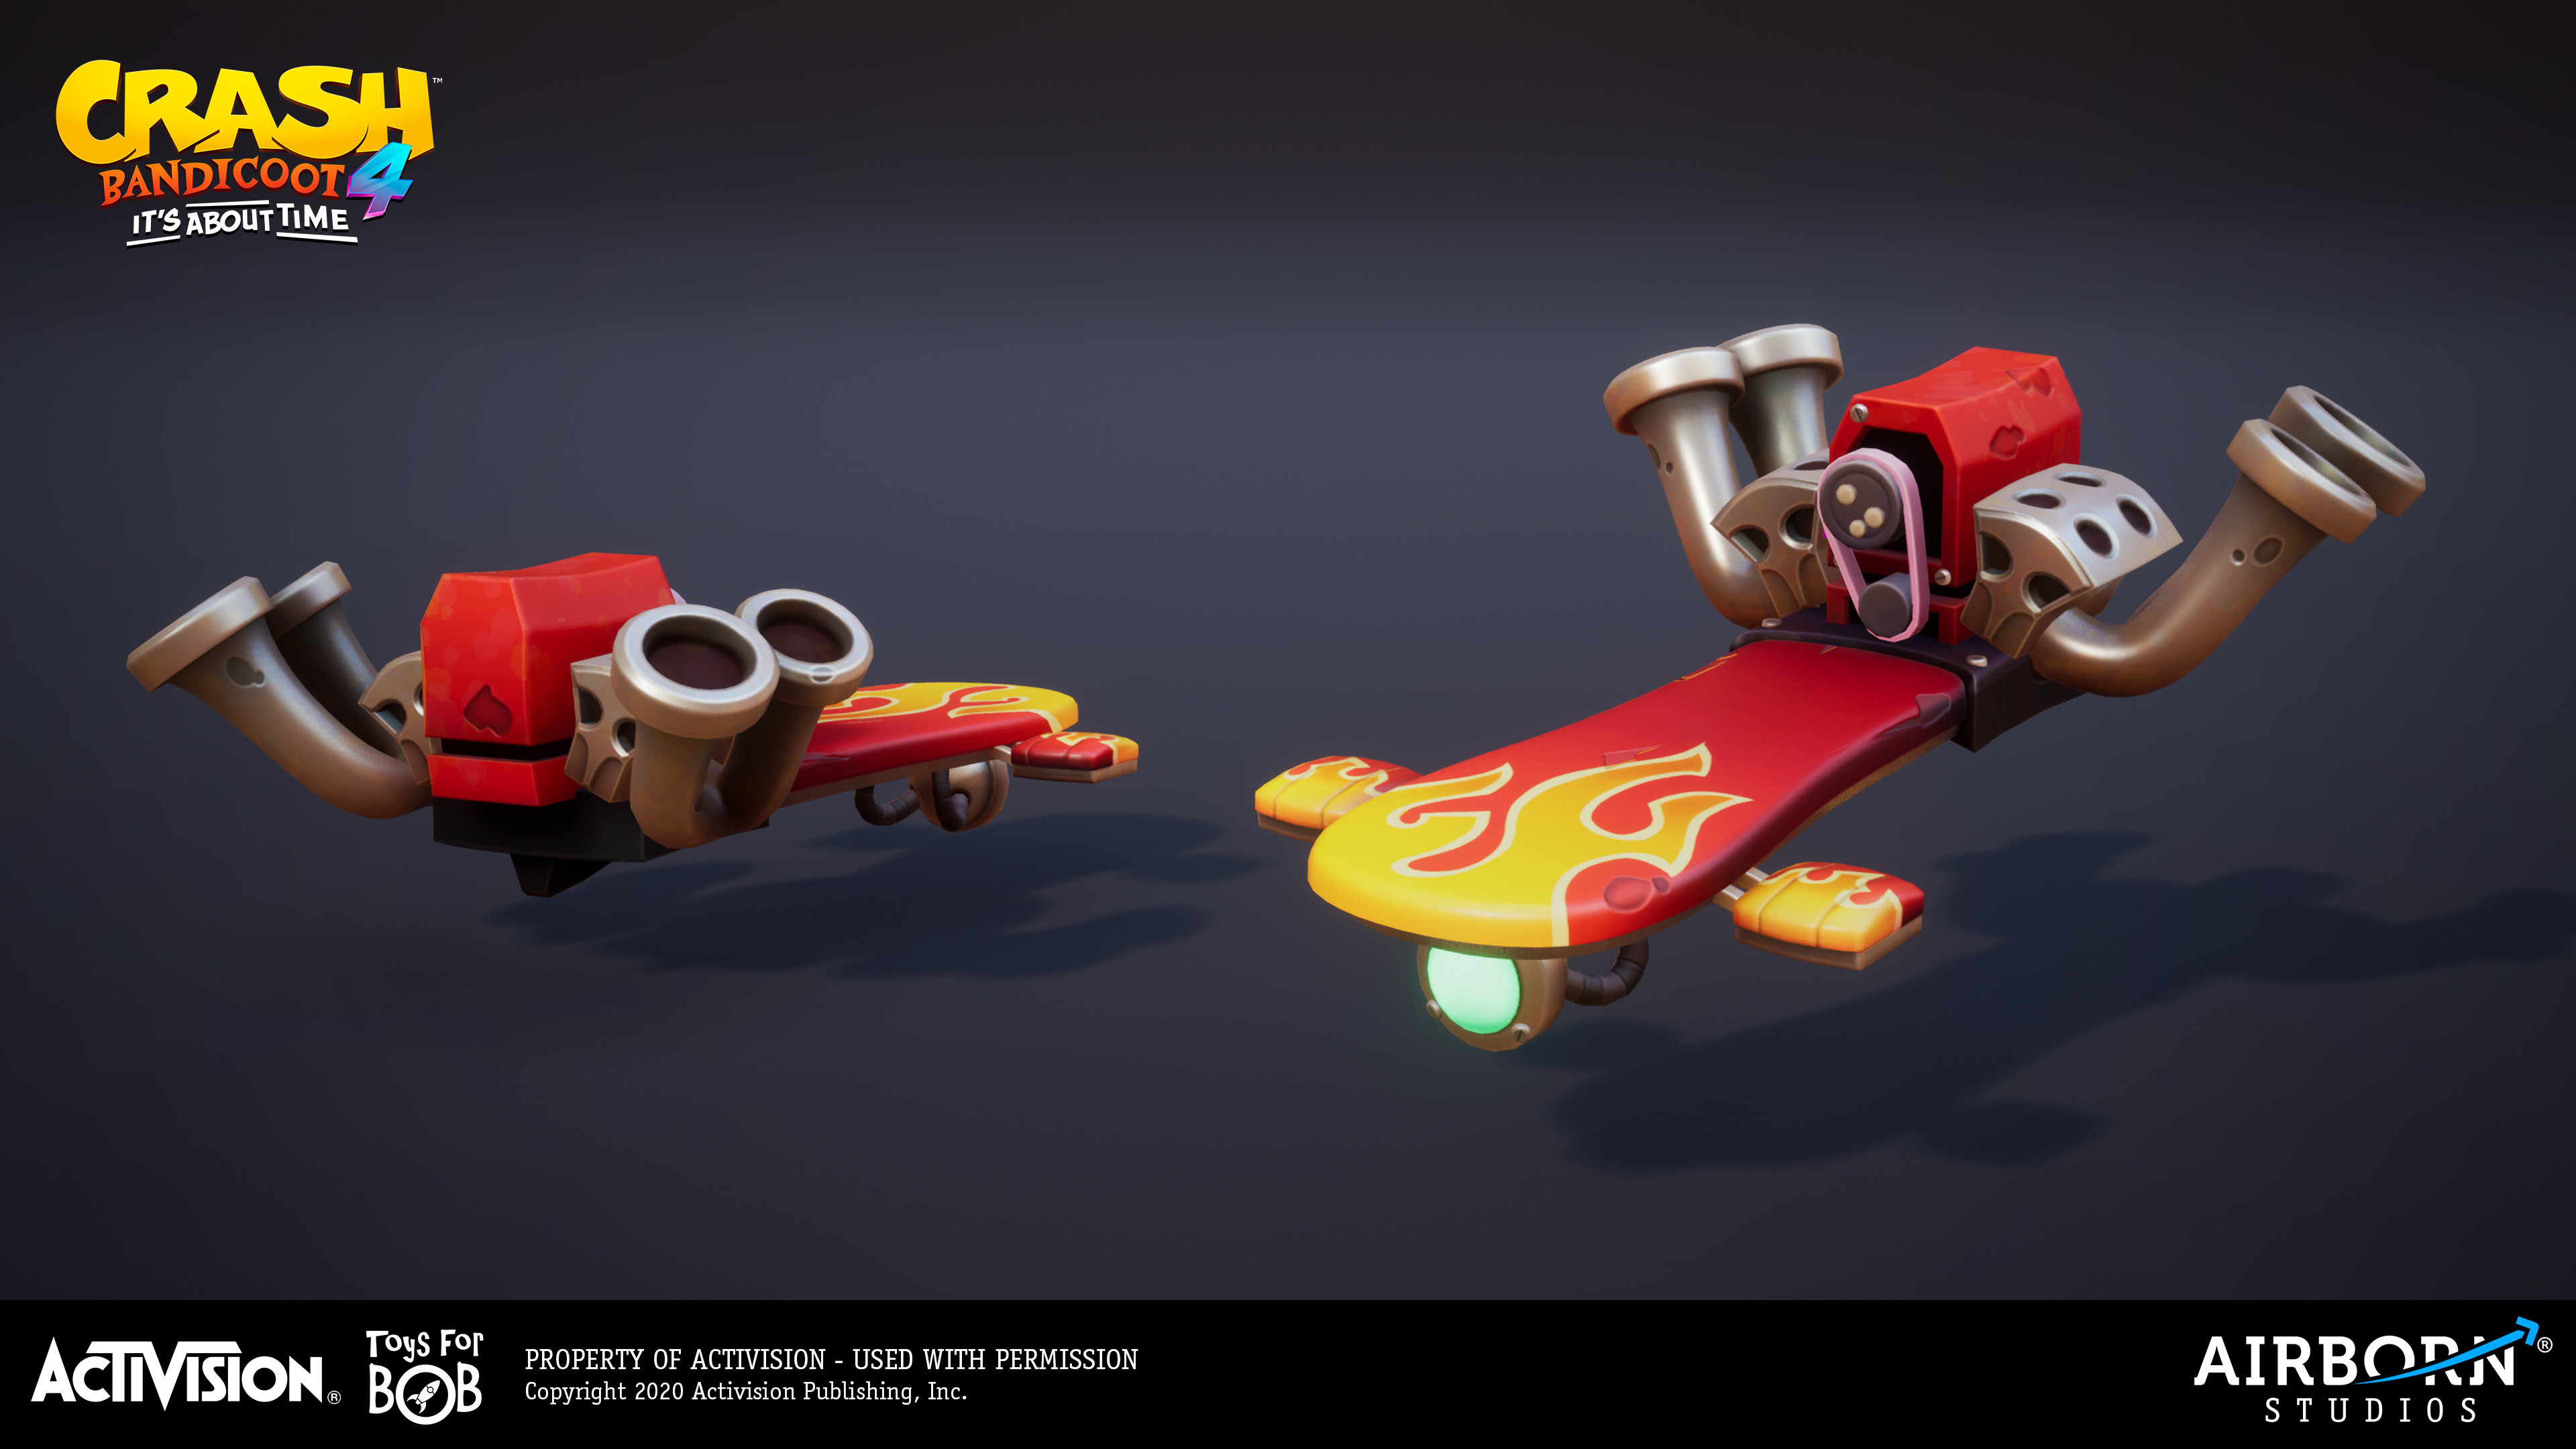 Classic Swamp Hoverboard done by Florentine Postema. Concept provided by Toys for Bob and done by Nicholas Kole,